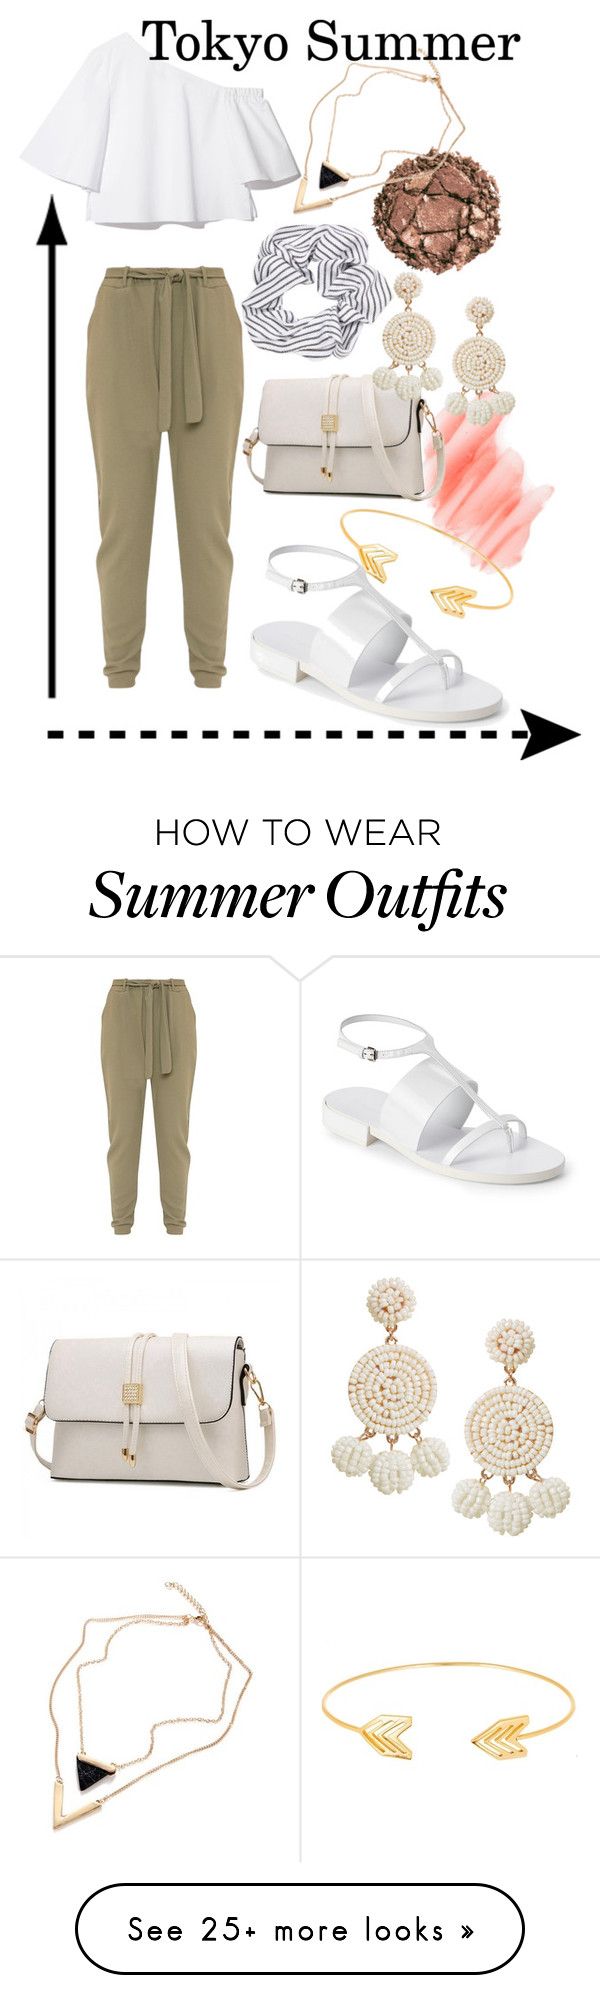 "Travel Series: Tokyo Summer outfit" by outfitsdisney on Polyvore feat...